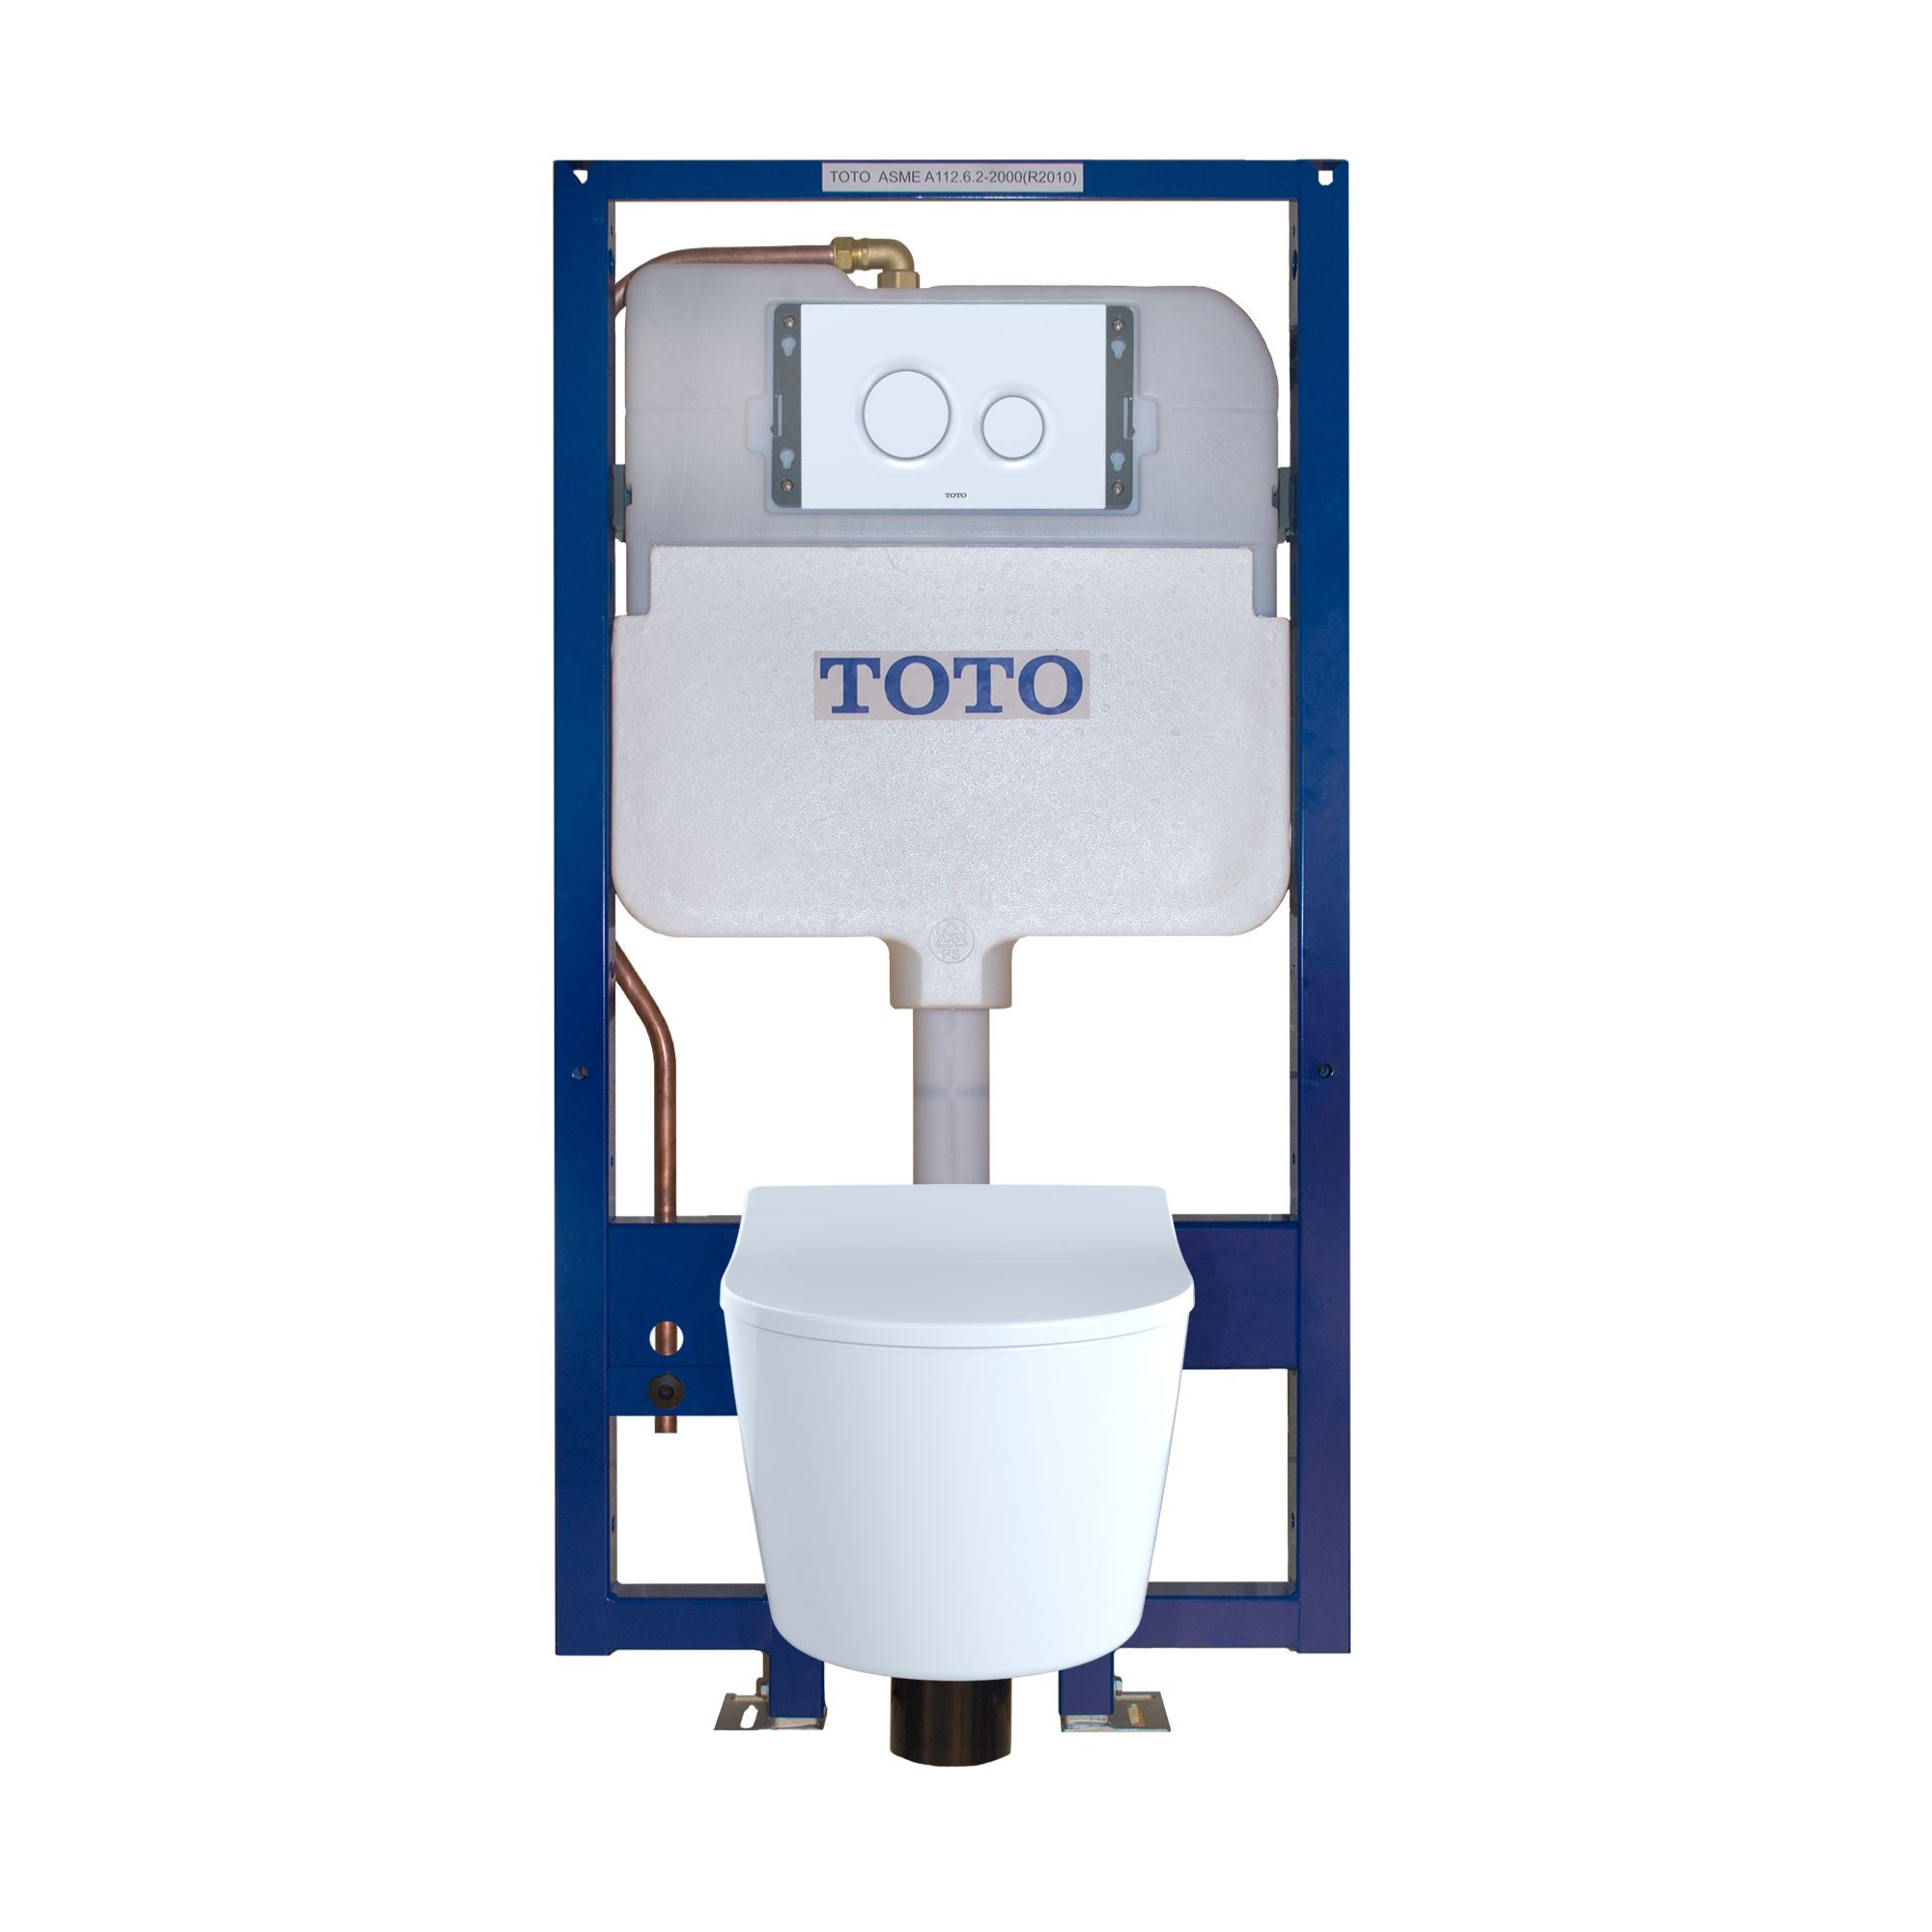 Toto RP Wall-hung Toilet & In-wall Tank System - 1.28/0.9 GPF